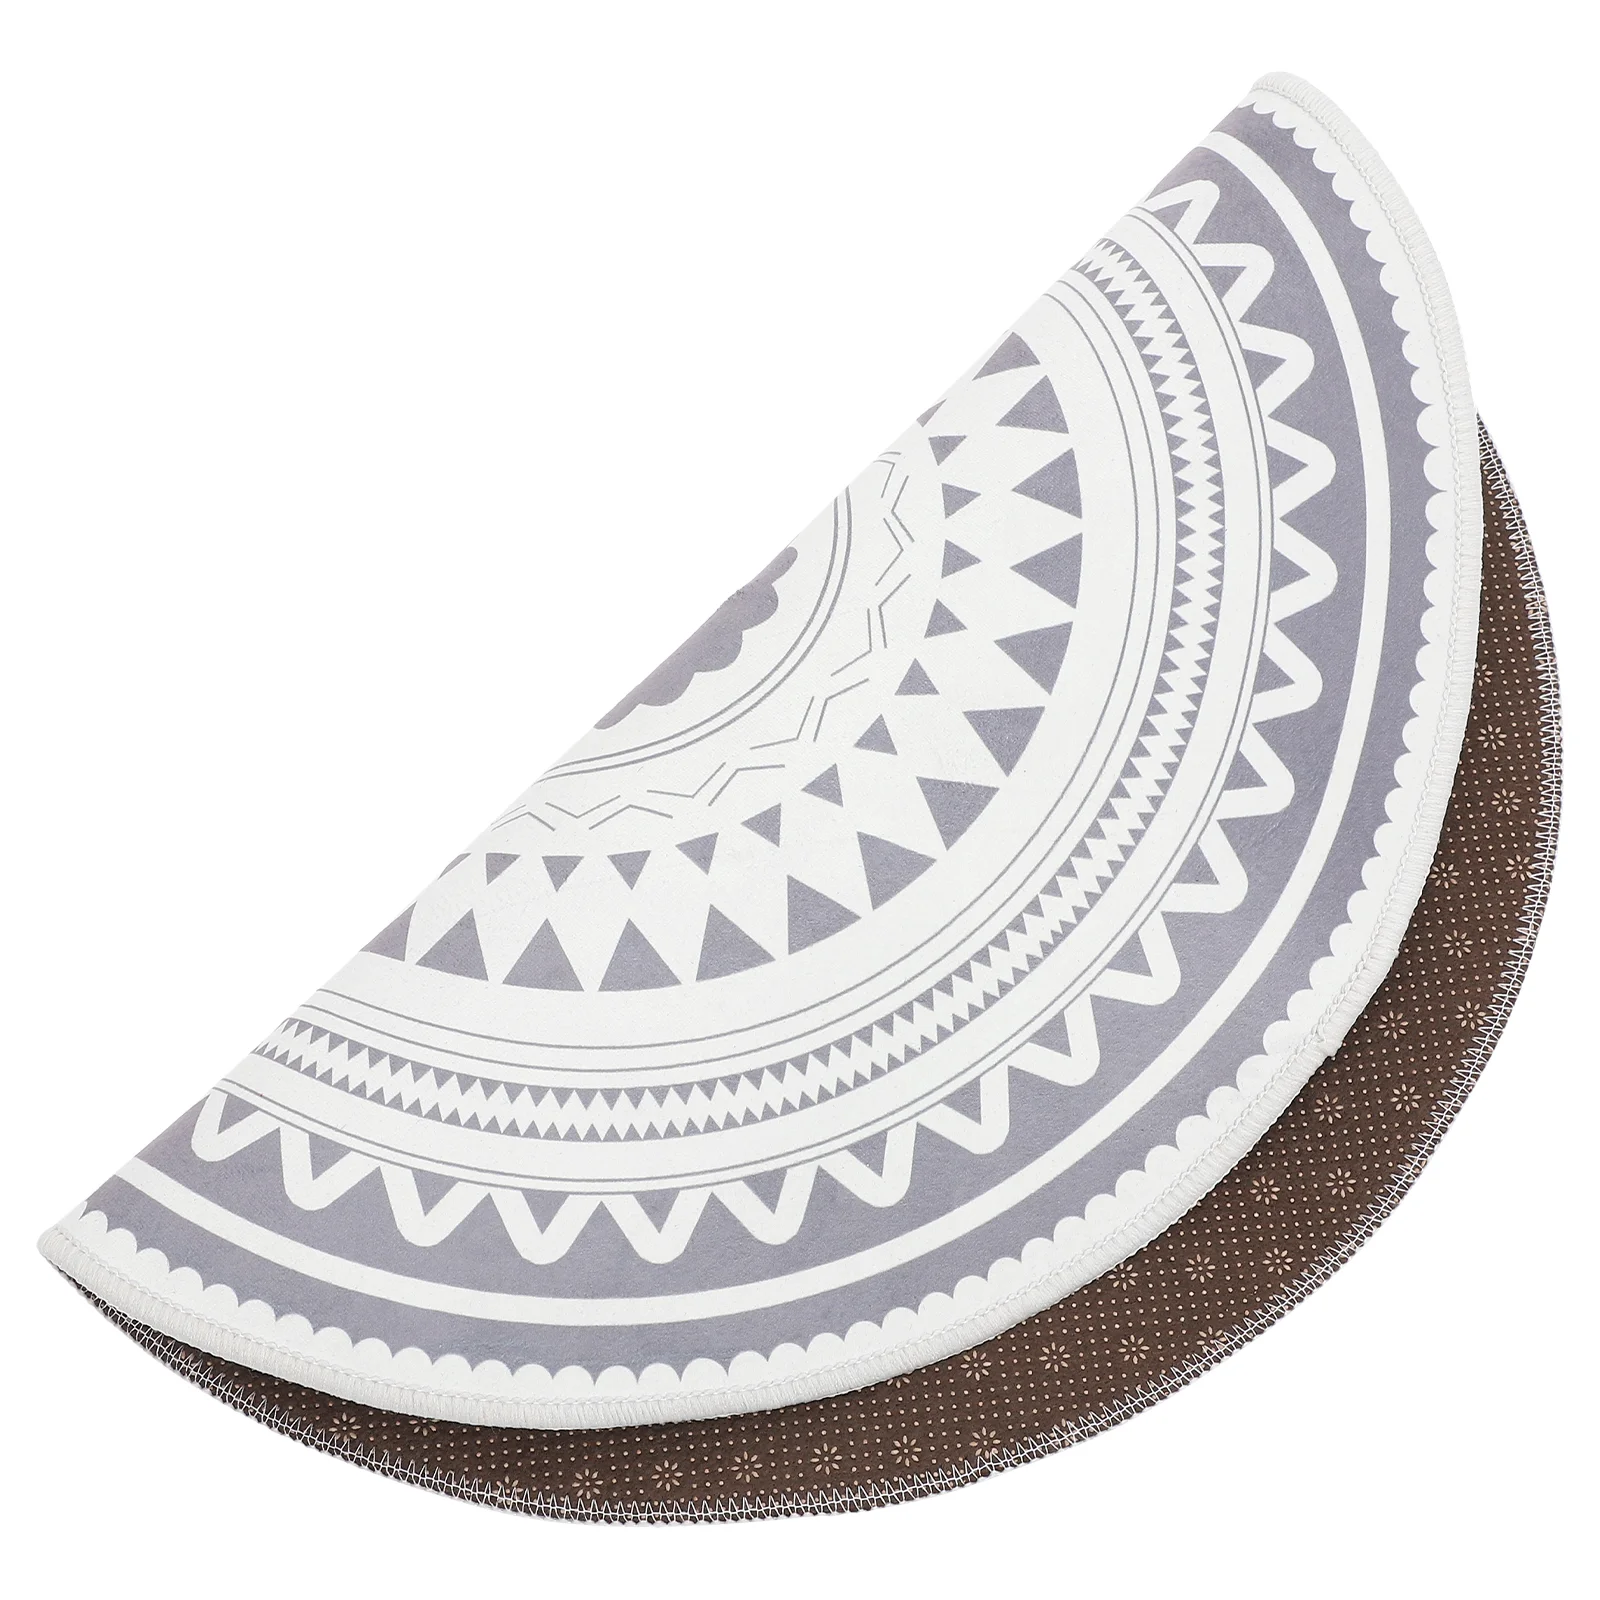 

Bath Mat Gray Grey Area Rugs Fors For Hanging Basket Livingroom Grey Area Rugs Fors Fors Bathroom Floor Mats Ground for